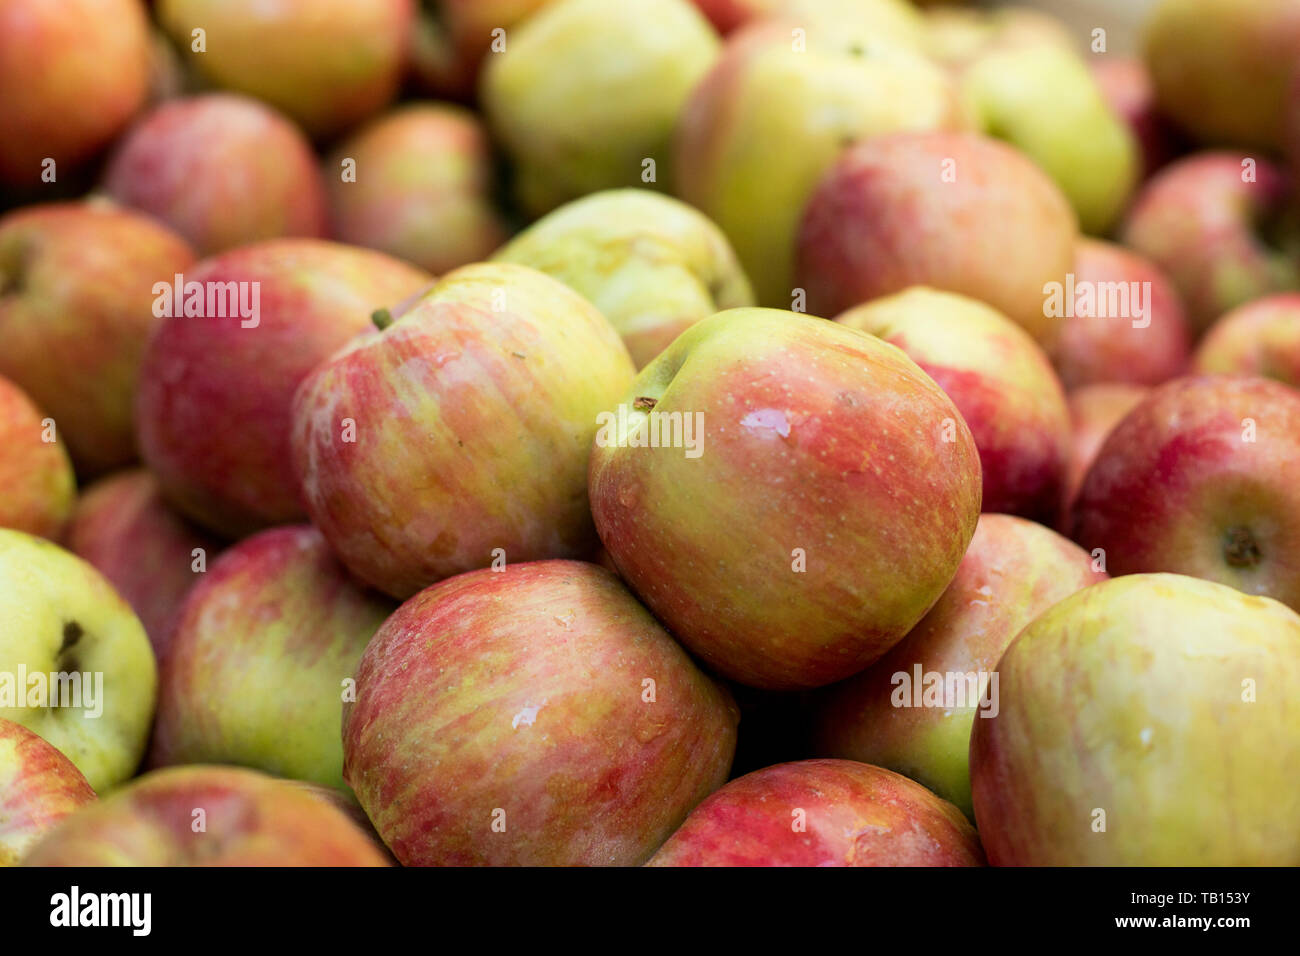 Bunch of gala apples for sale in maket. Stock Photo